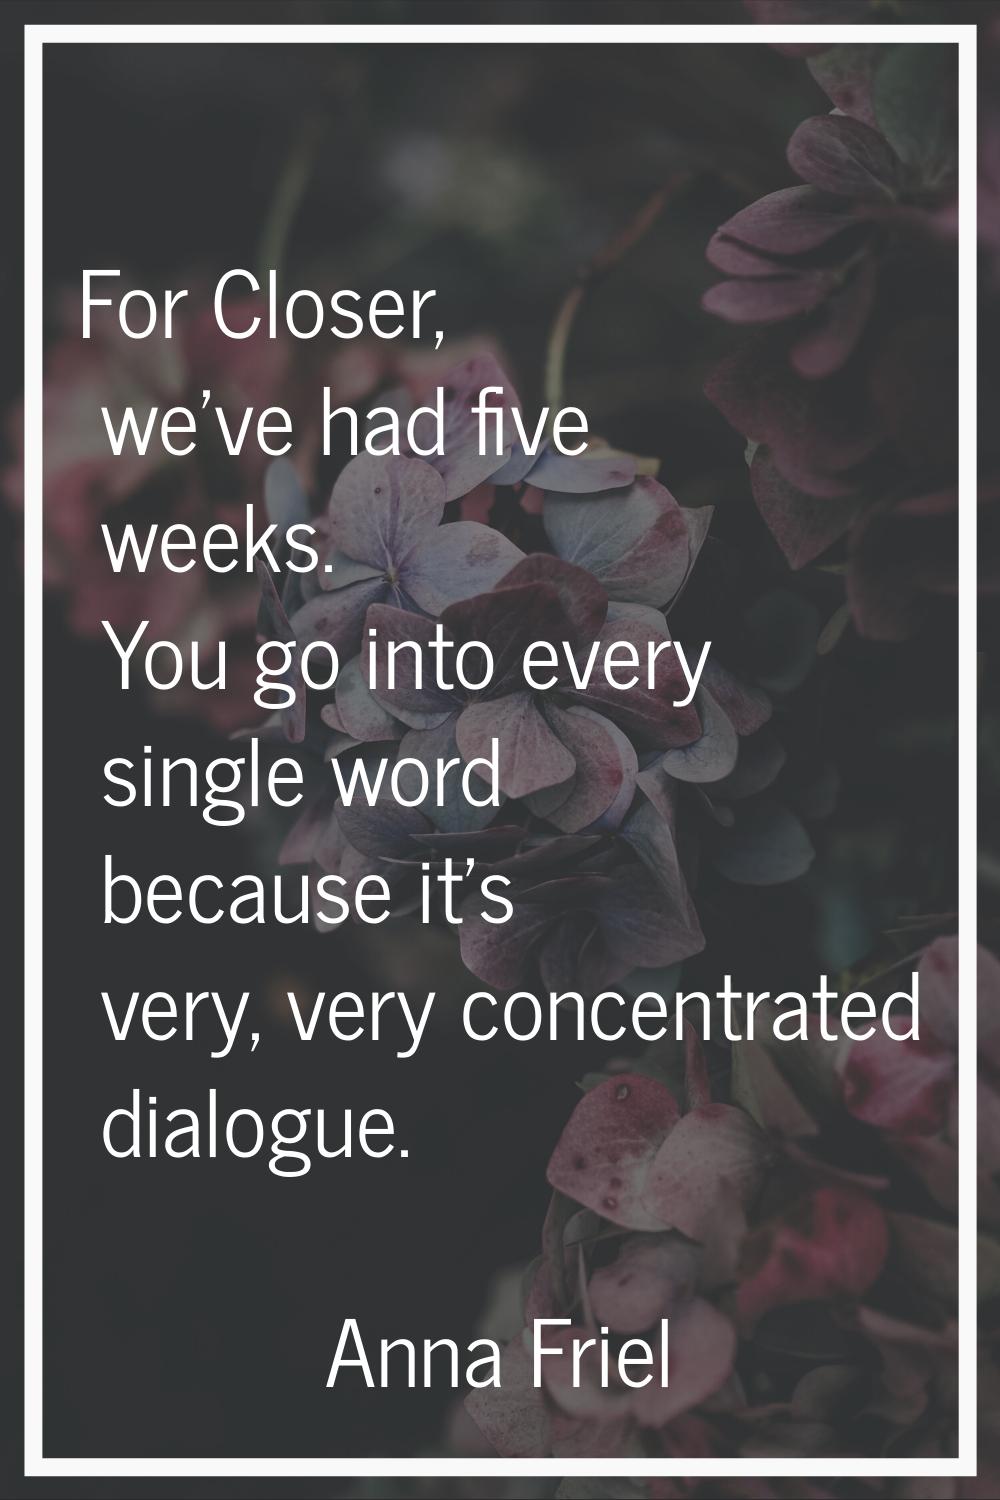 For Closer, we've had five weeks. You go into every single word because it's very, very concentrate